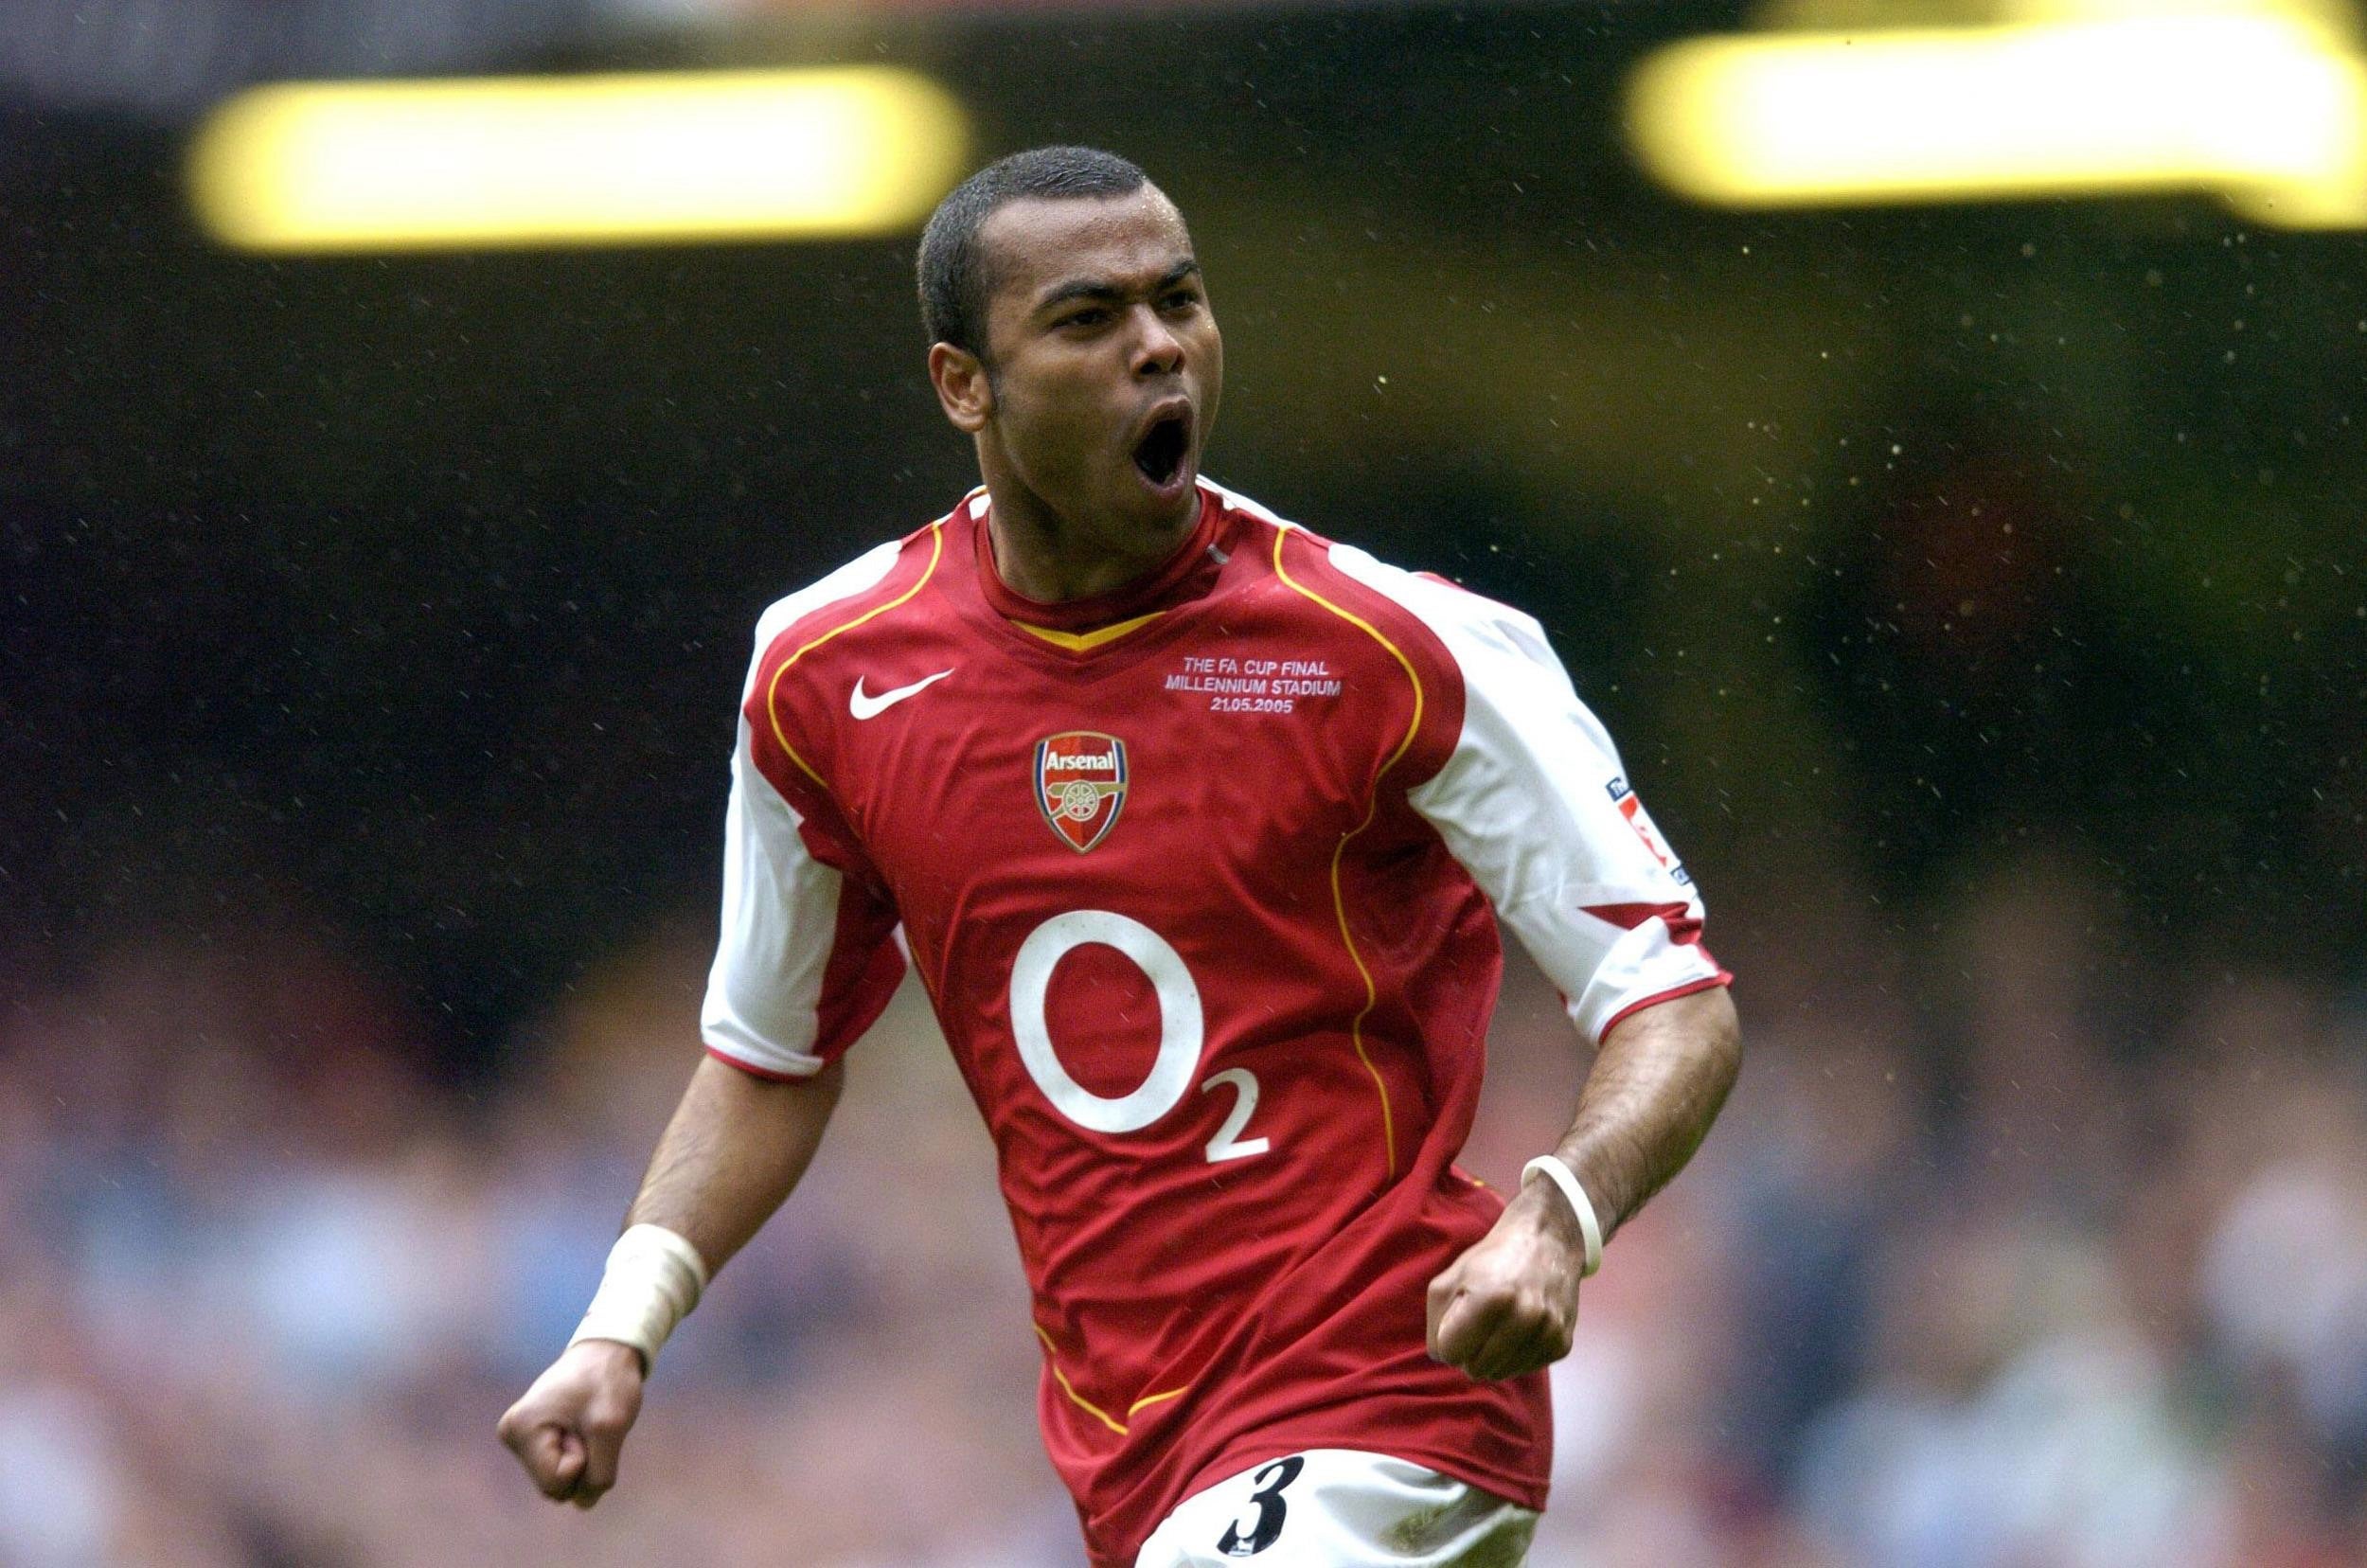 Ashley Cole won two Premier League titles with Arsenal before leaving to join Chelsea (Rebecca Naden/PA)